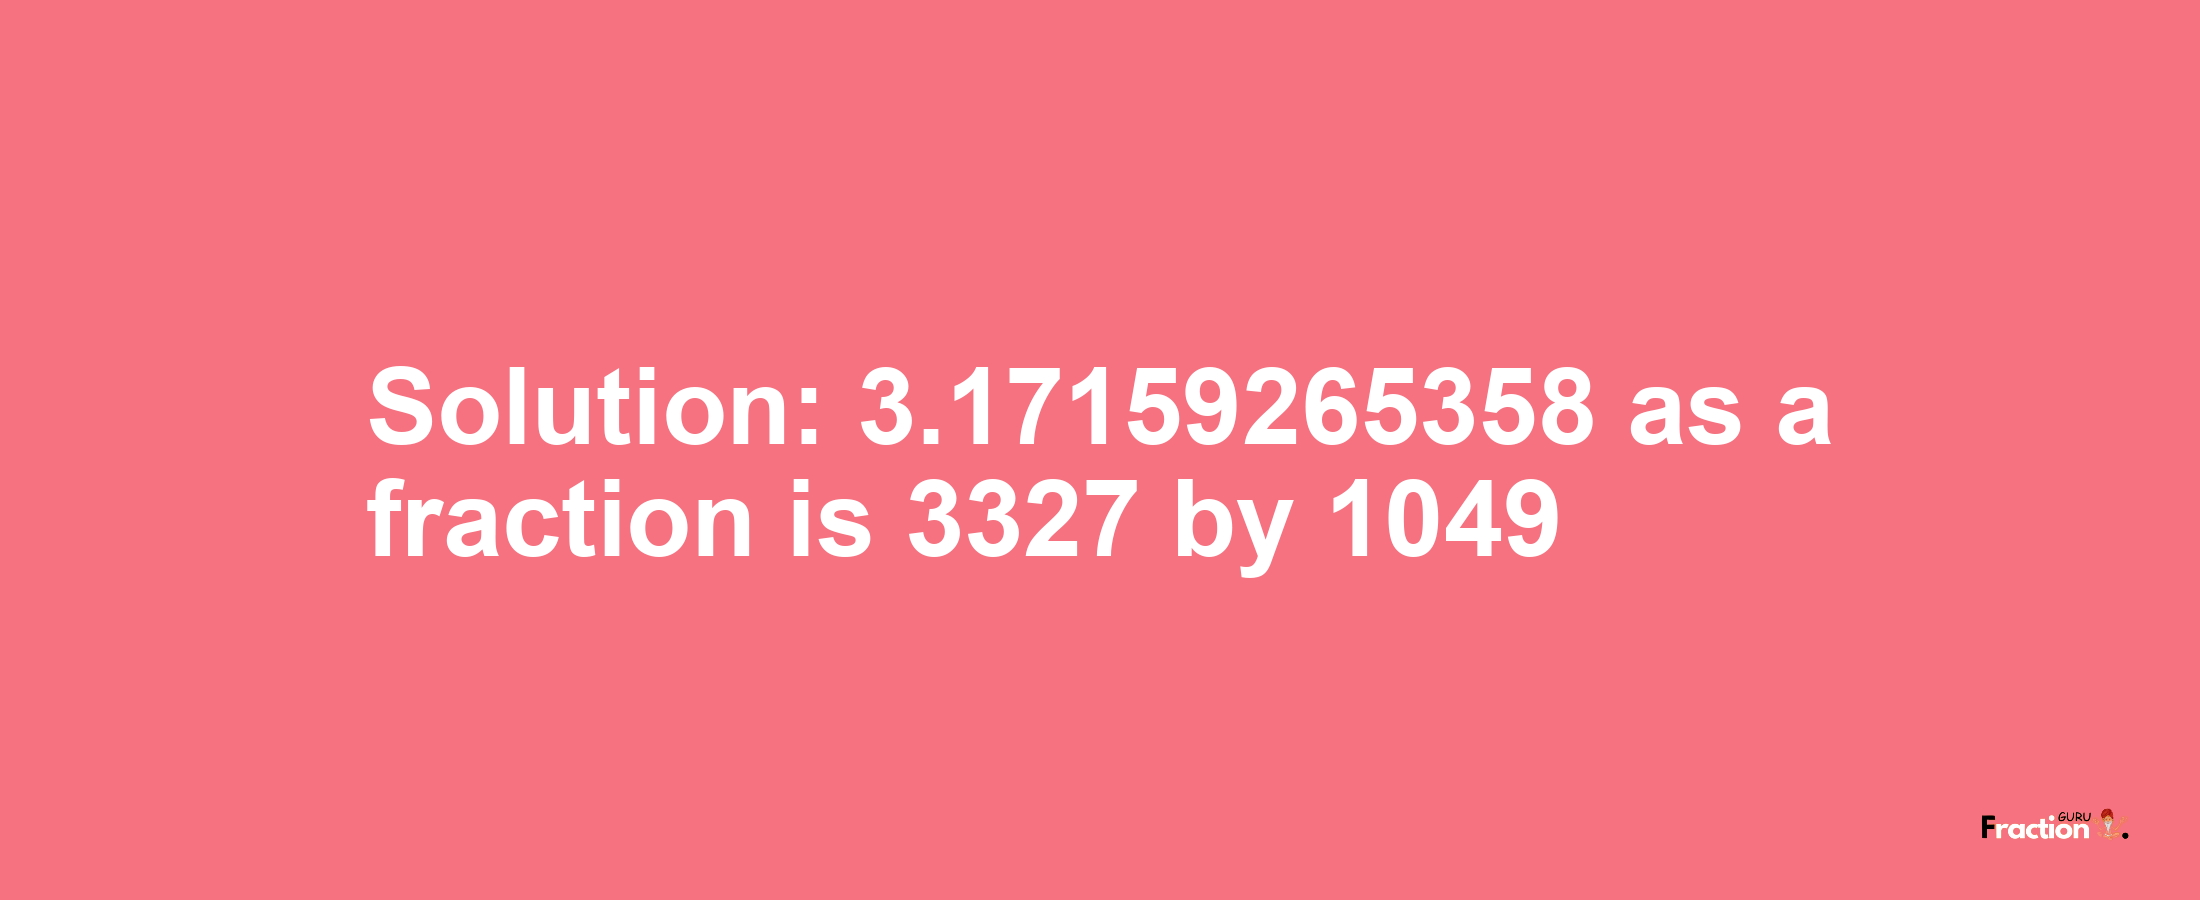 Solution:3.17159265358 as a fraction is 3327/1049